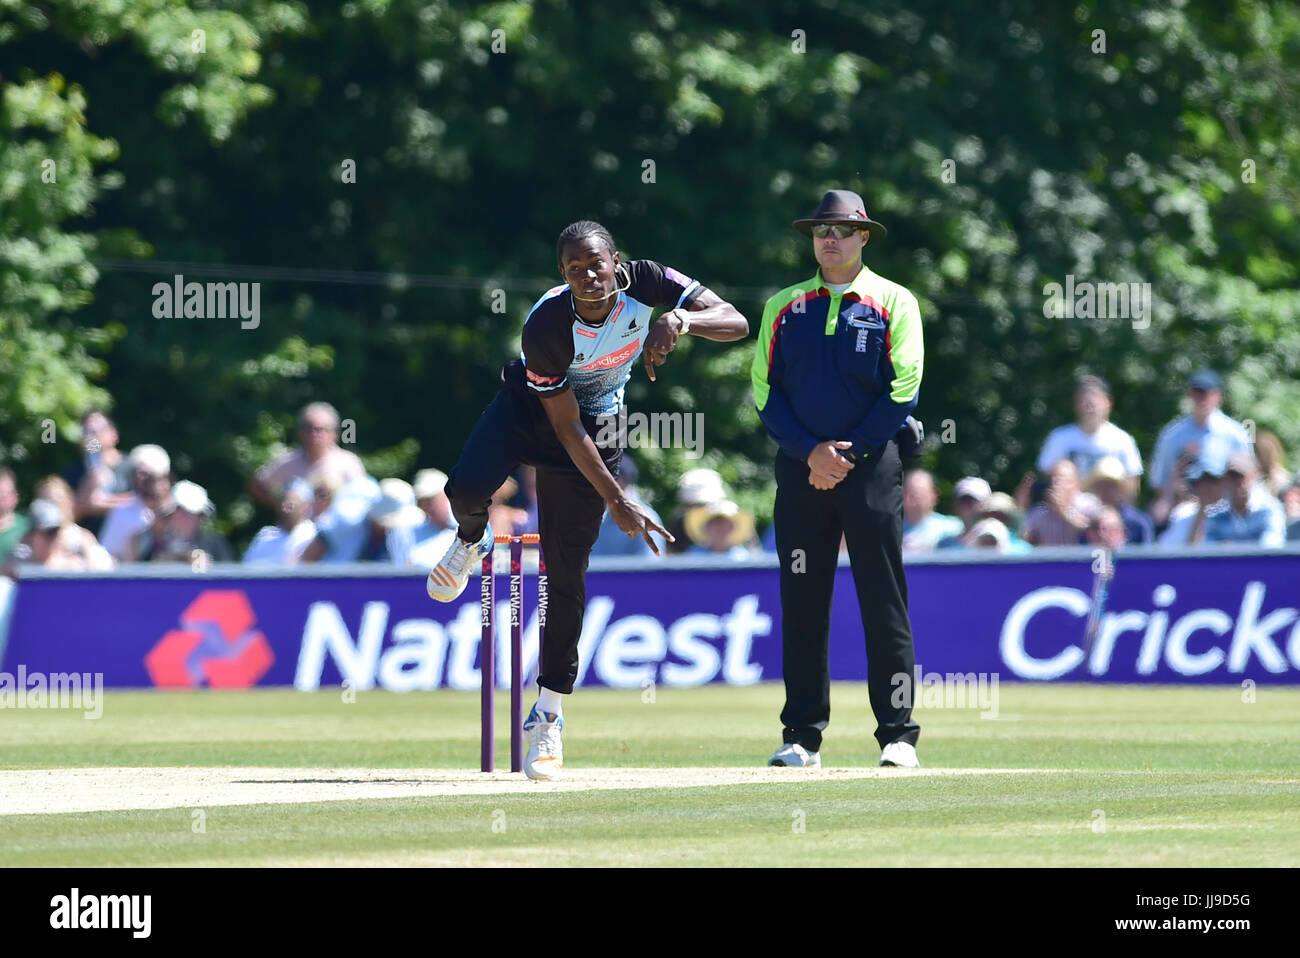 Jofra Archer of Sussex Sharks bowling v Glamorgan in the NatWest T20 blast match at the Arundel Castle ground in West Sussex UK Sunday 9th July 2017  Photograph taken by Simon Dack Stock Photo